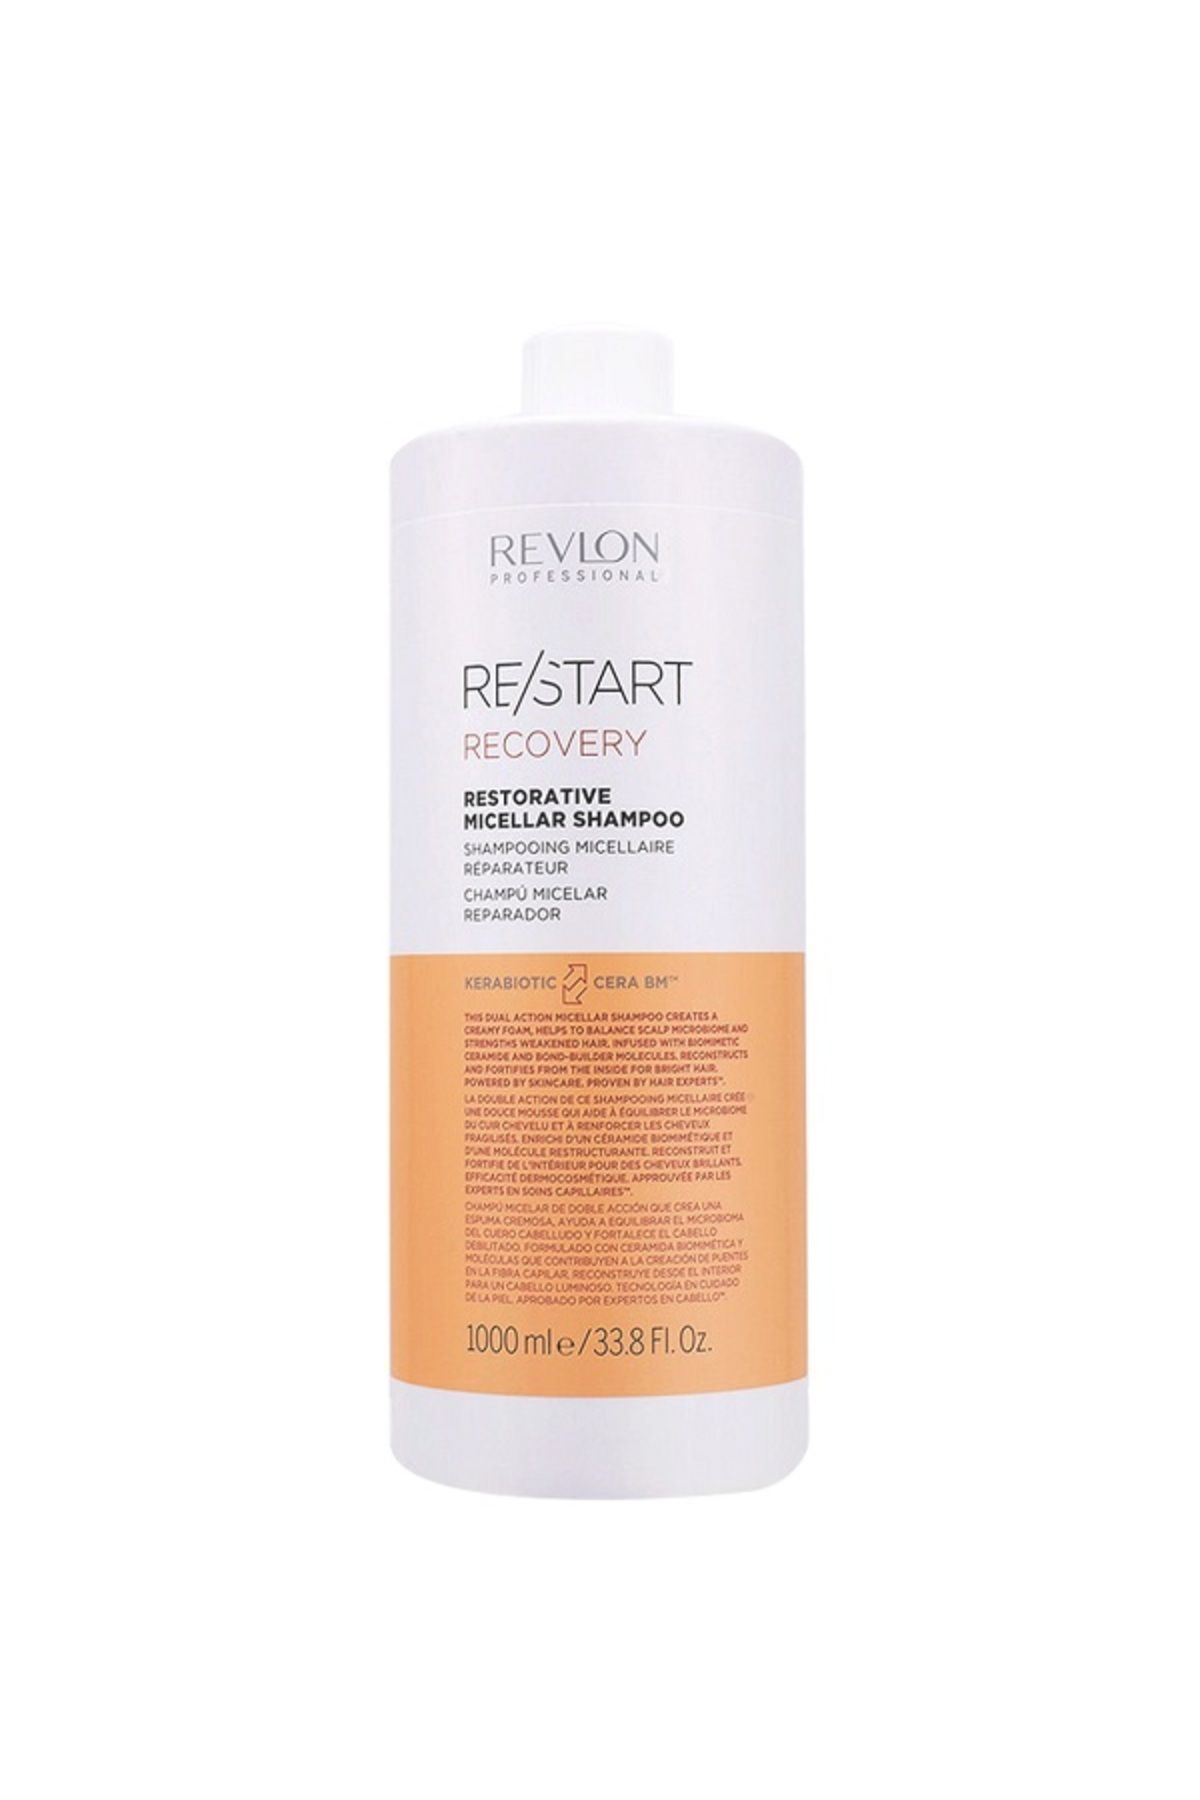 Revlon Restart Recovery Repairing and Strengthening Shampoo for Damaged and Damaged Hair 1000 ml DEMBA601